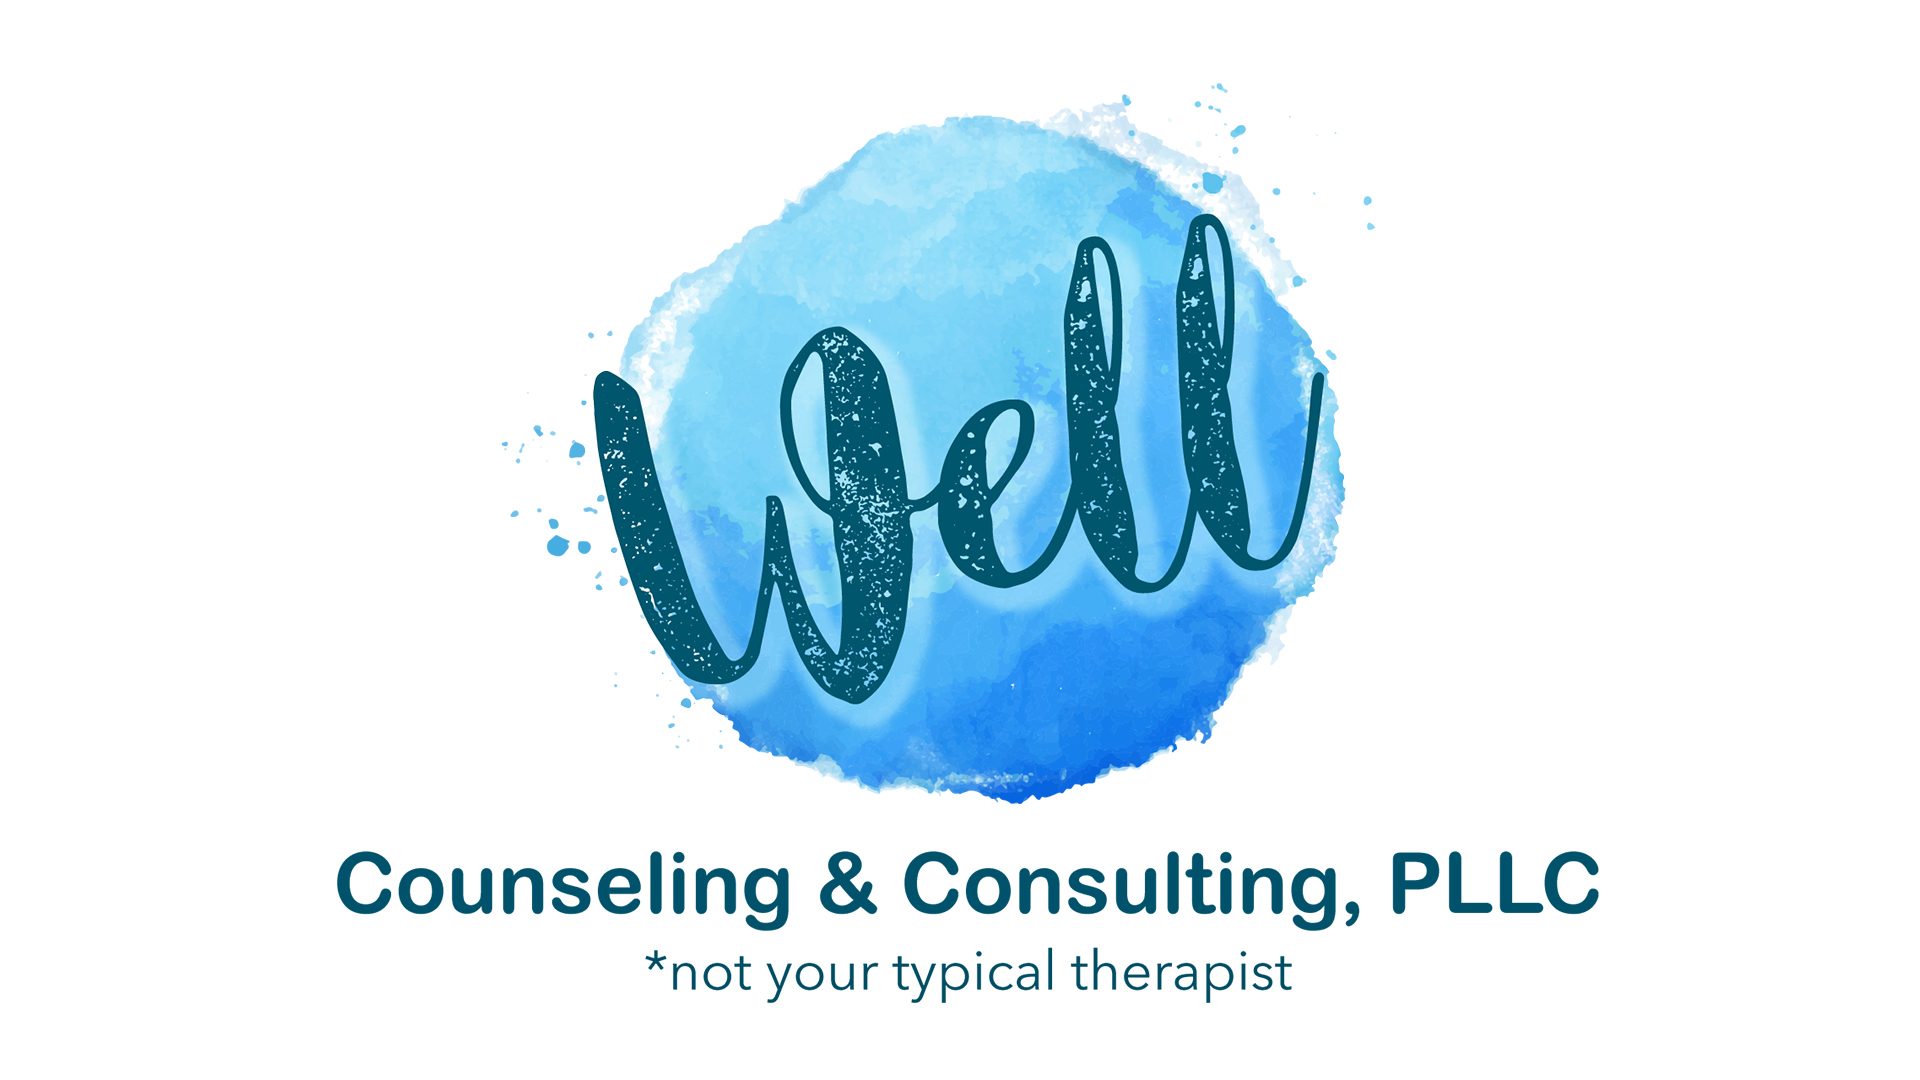 Well Counseling & Consulting PLLC